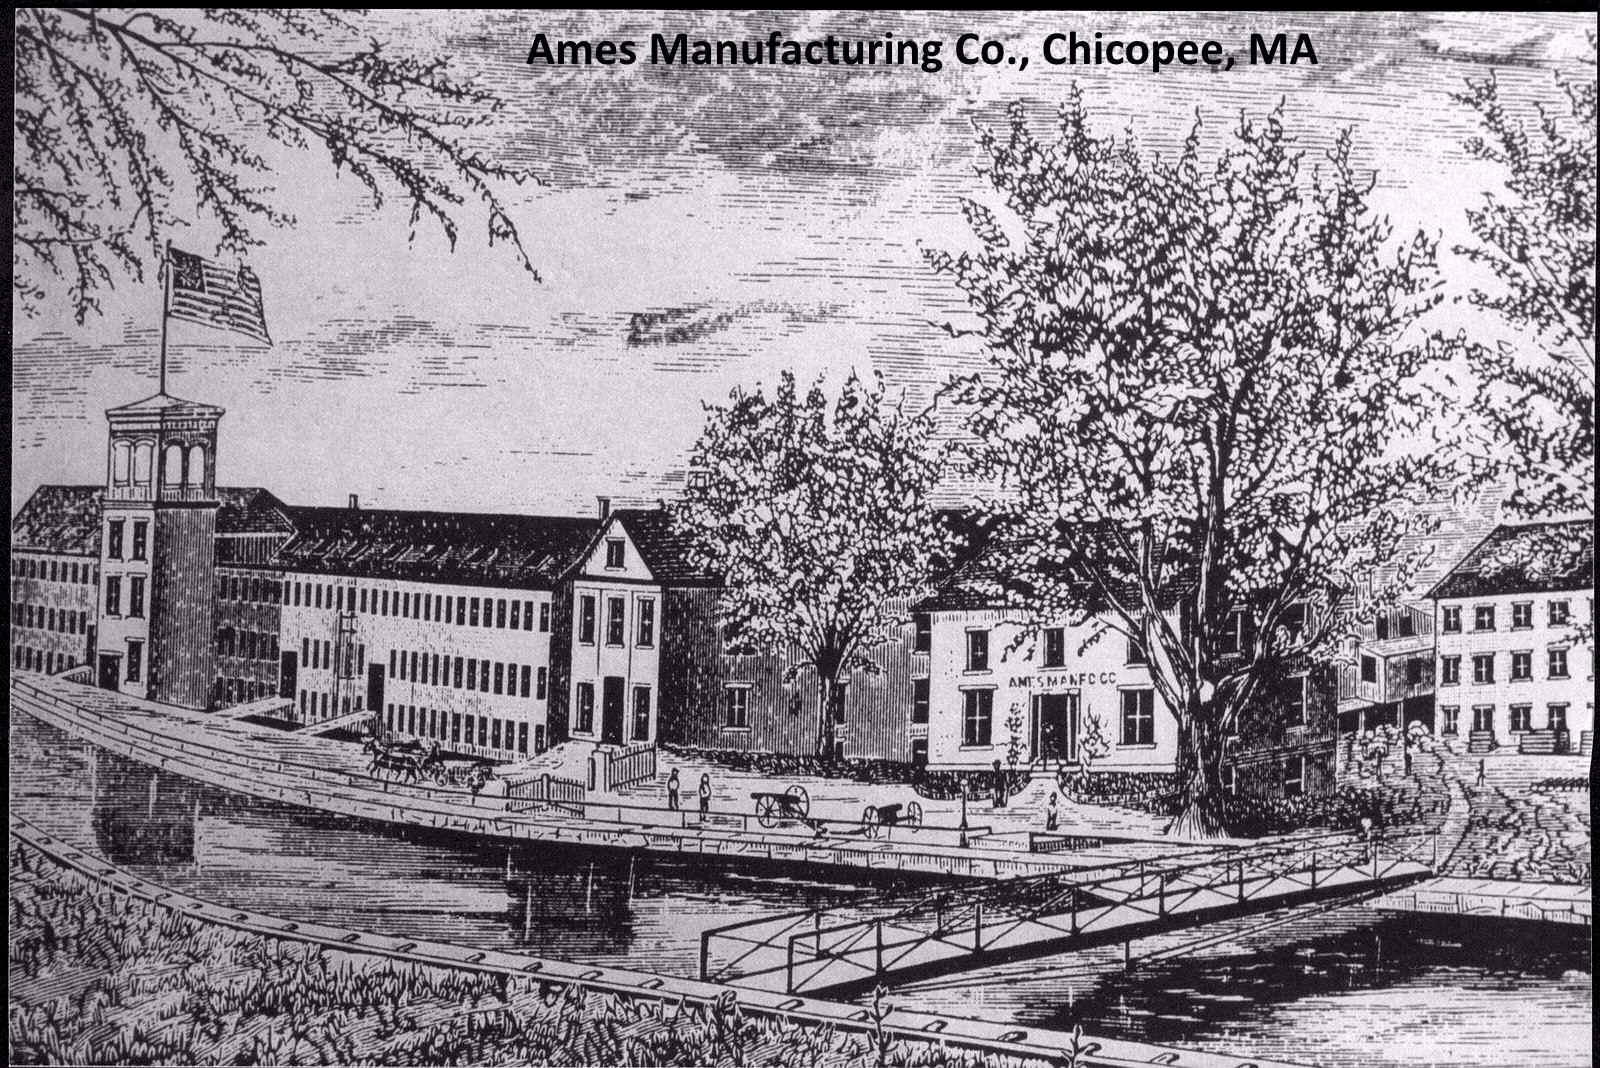 Ames Manufacturing Co., Chicopee, MA